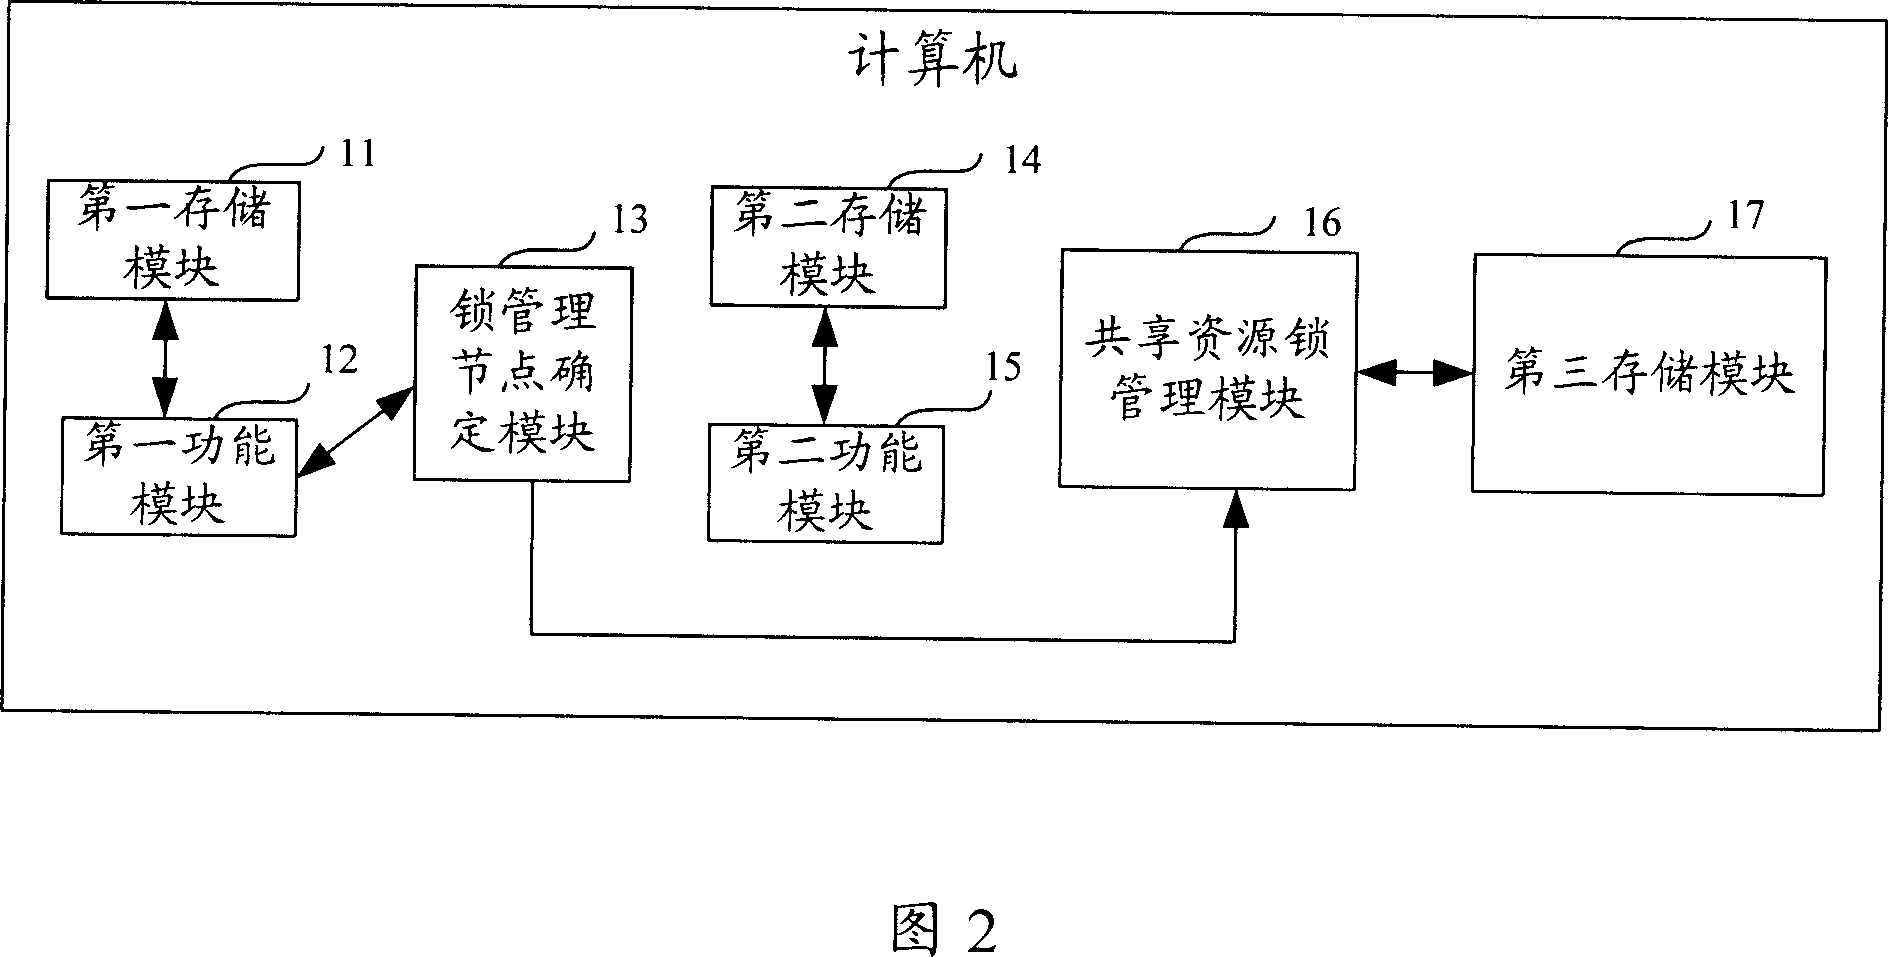 Method for distributing shared resource lock in computer cluster system and cluster system